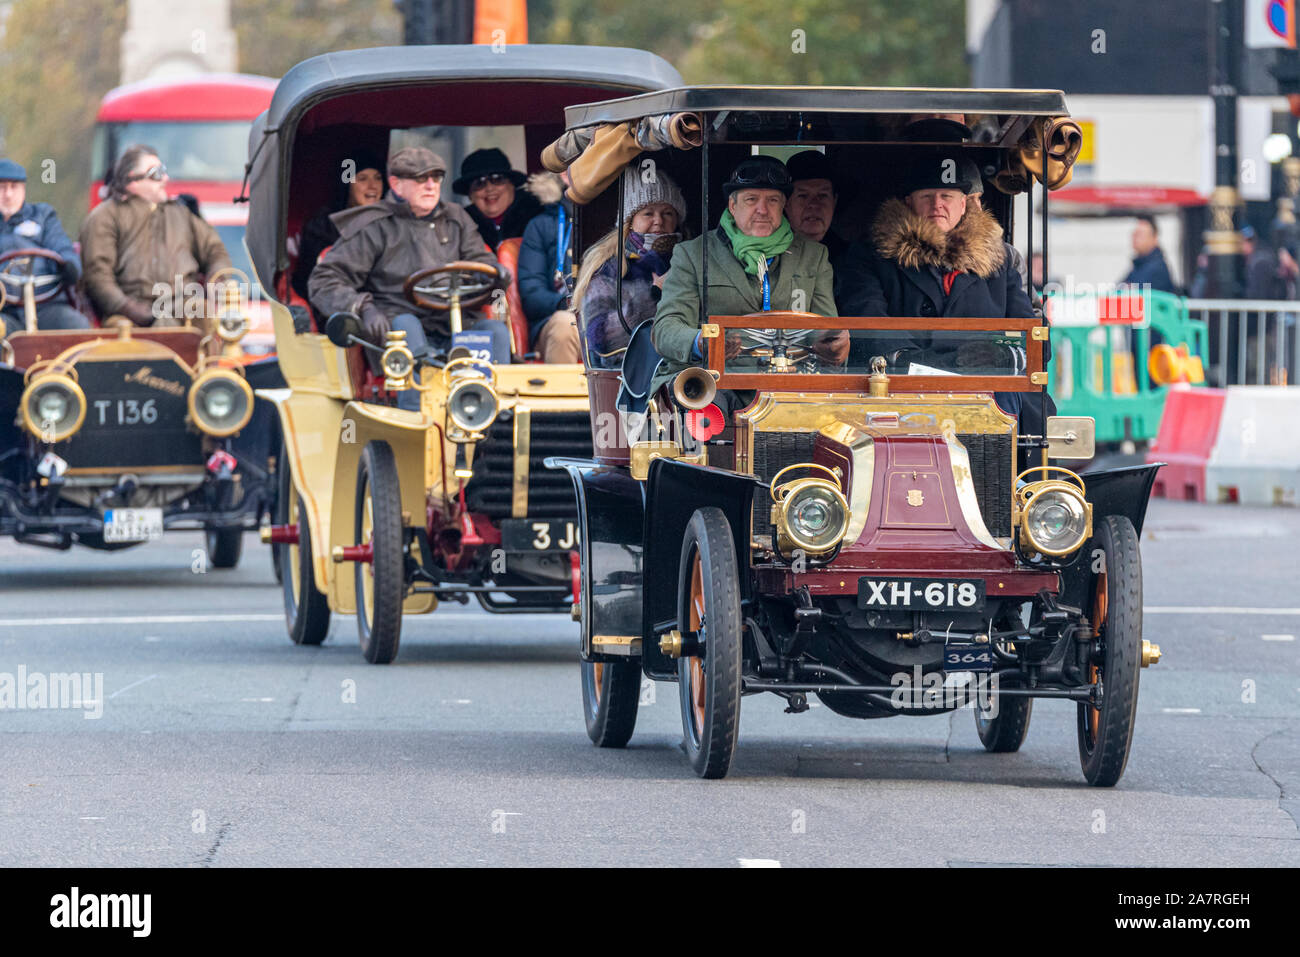 1904 Renault vintage car being driven through Westminster at the start of the London to Brighton veteran car run in November 2019. Cars Stock Photo